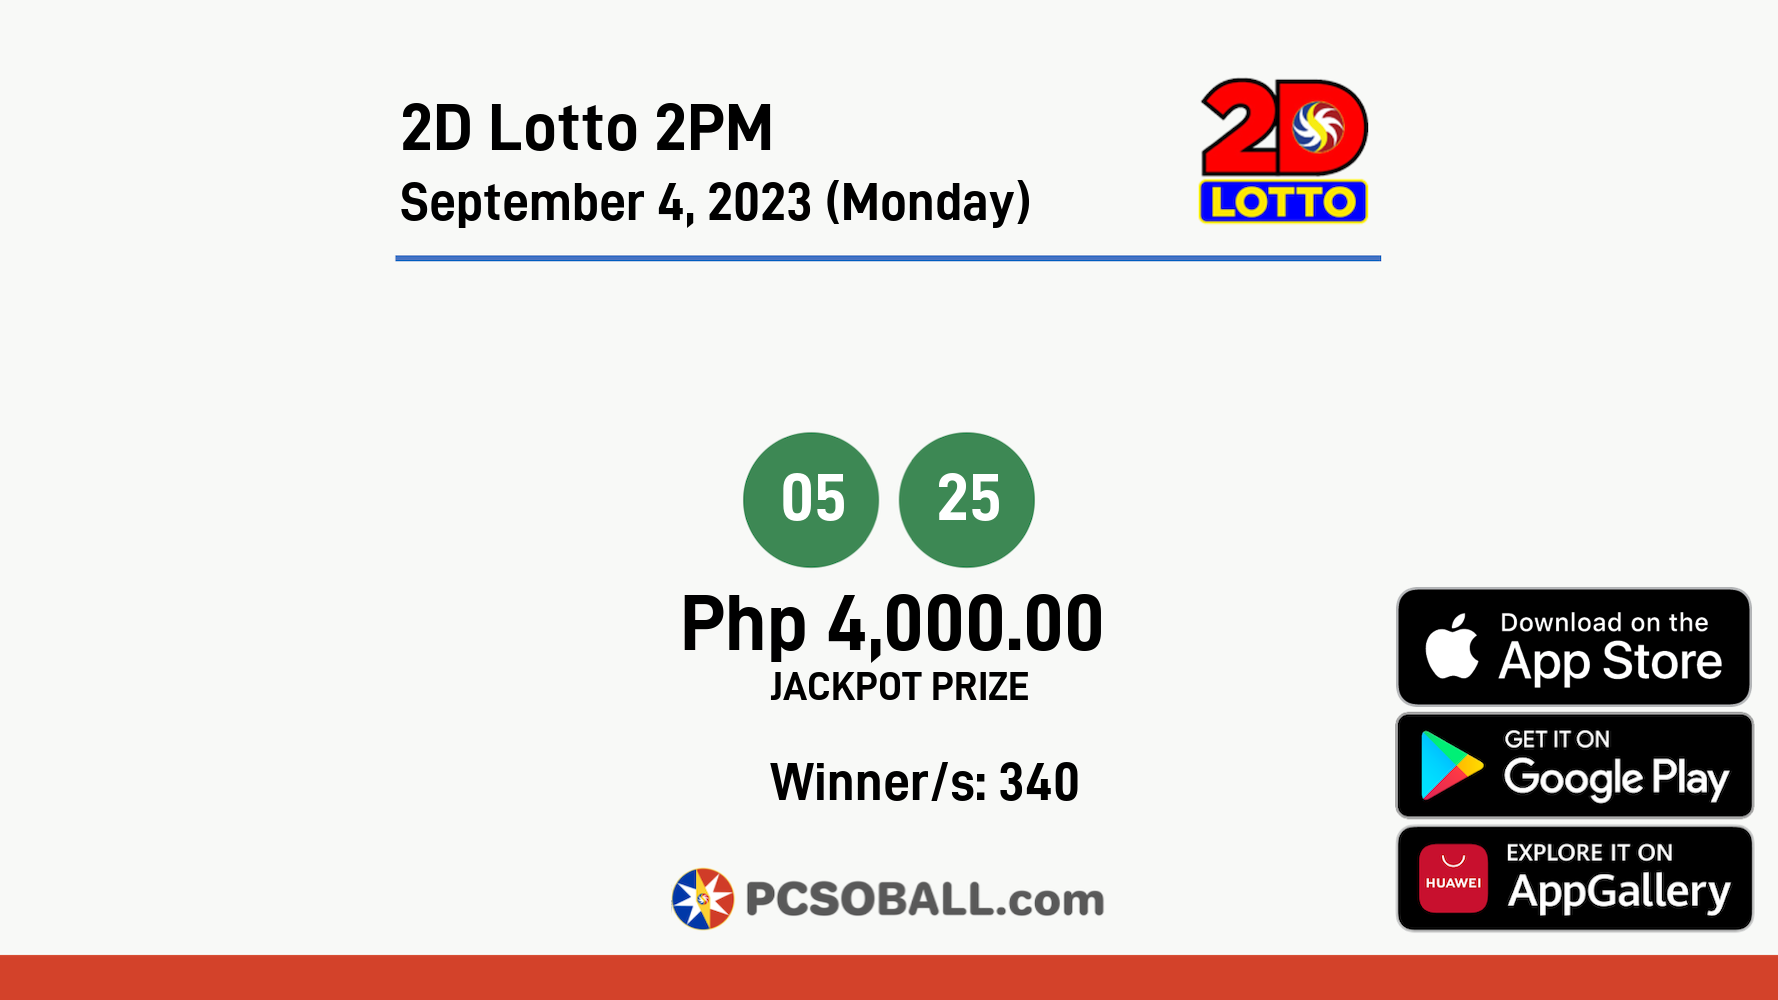 2D Lotto 2PM September 4, 2023 (Monday) Result